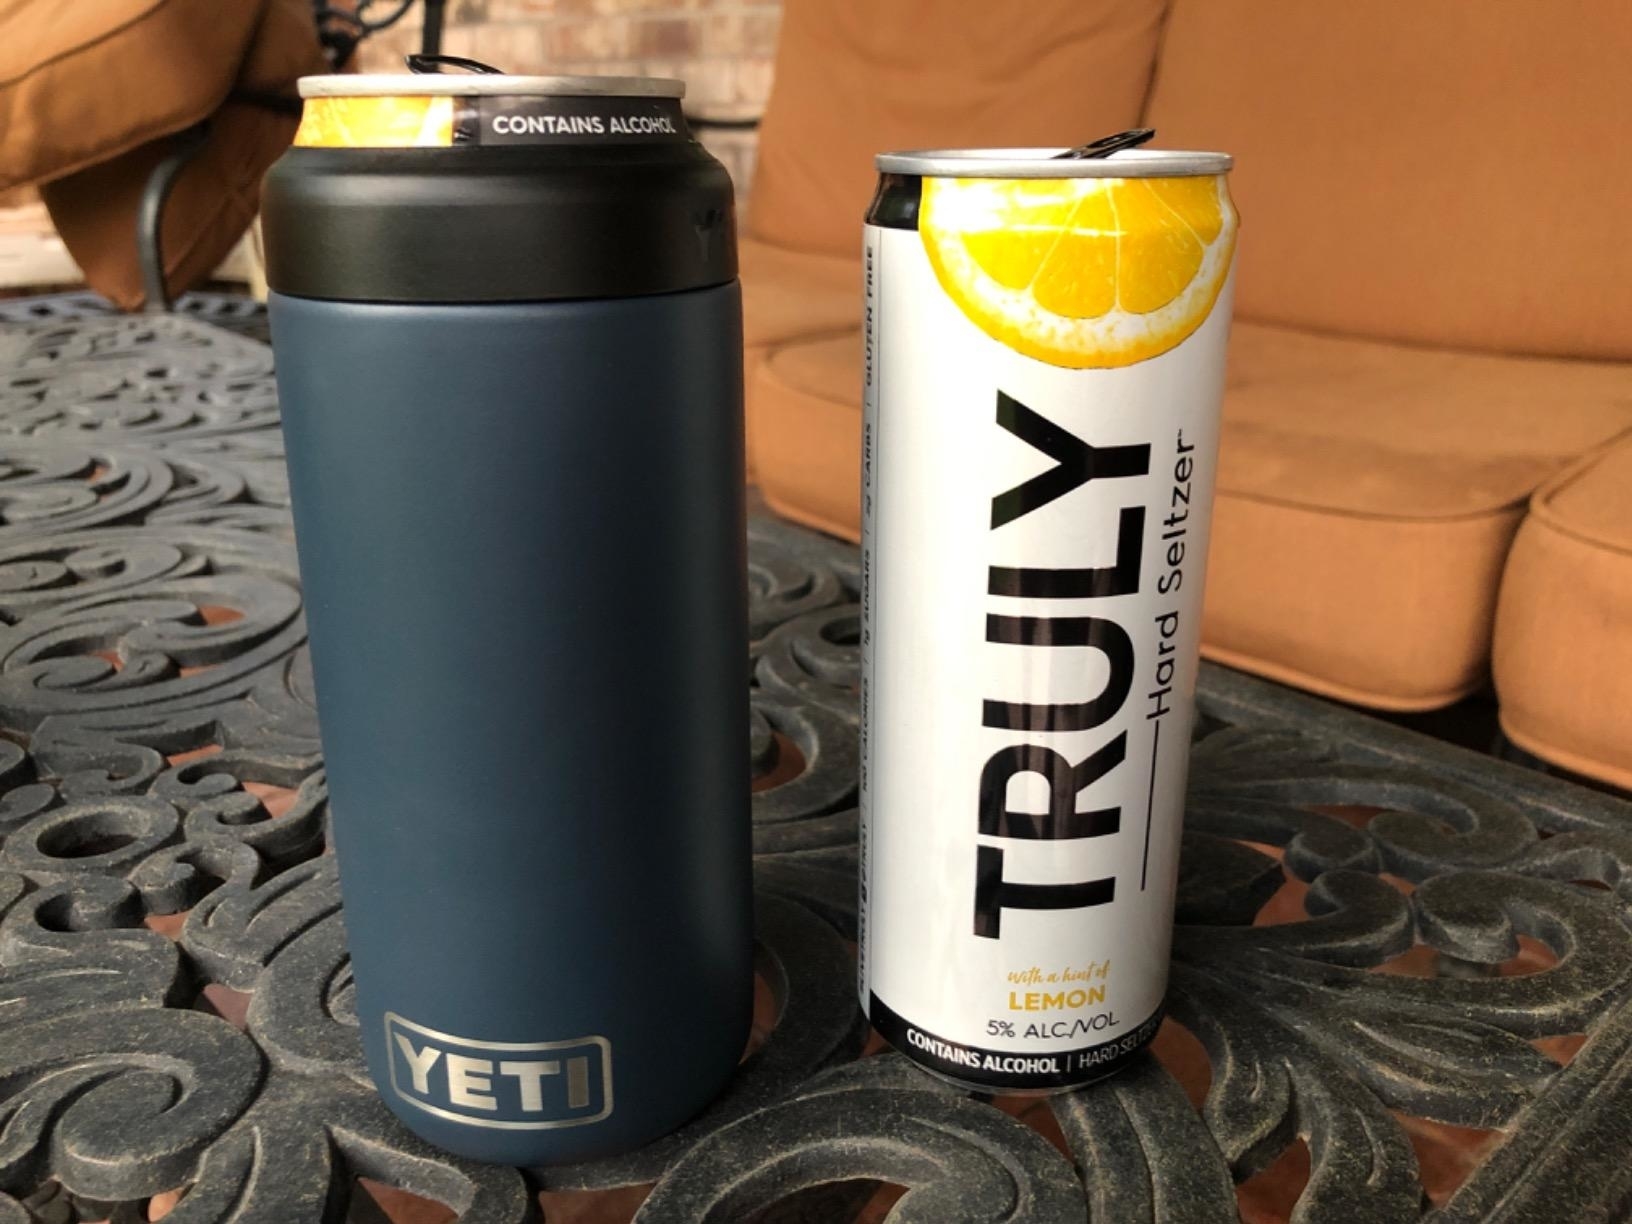 Yeti tumblers, can insulators, coolers are up to 50% off for Prime